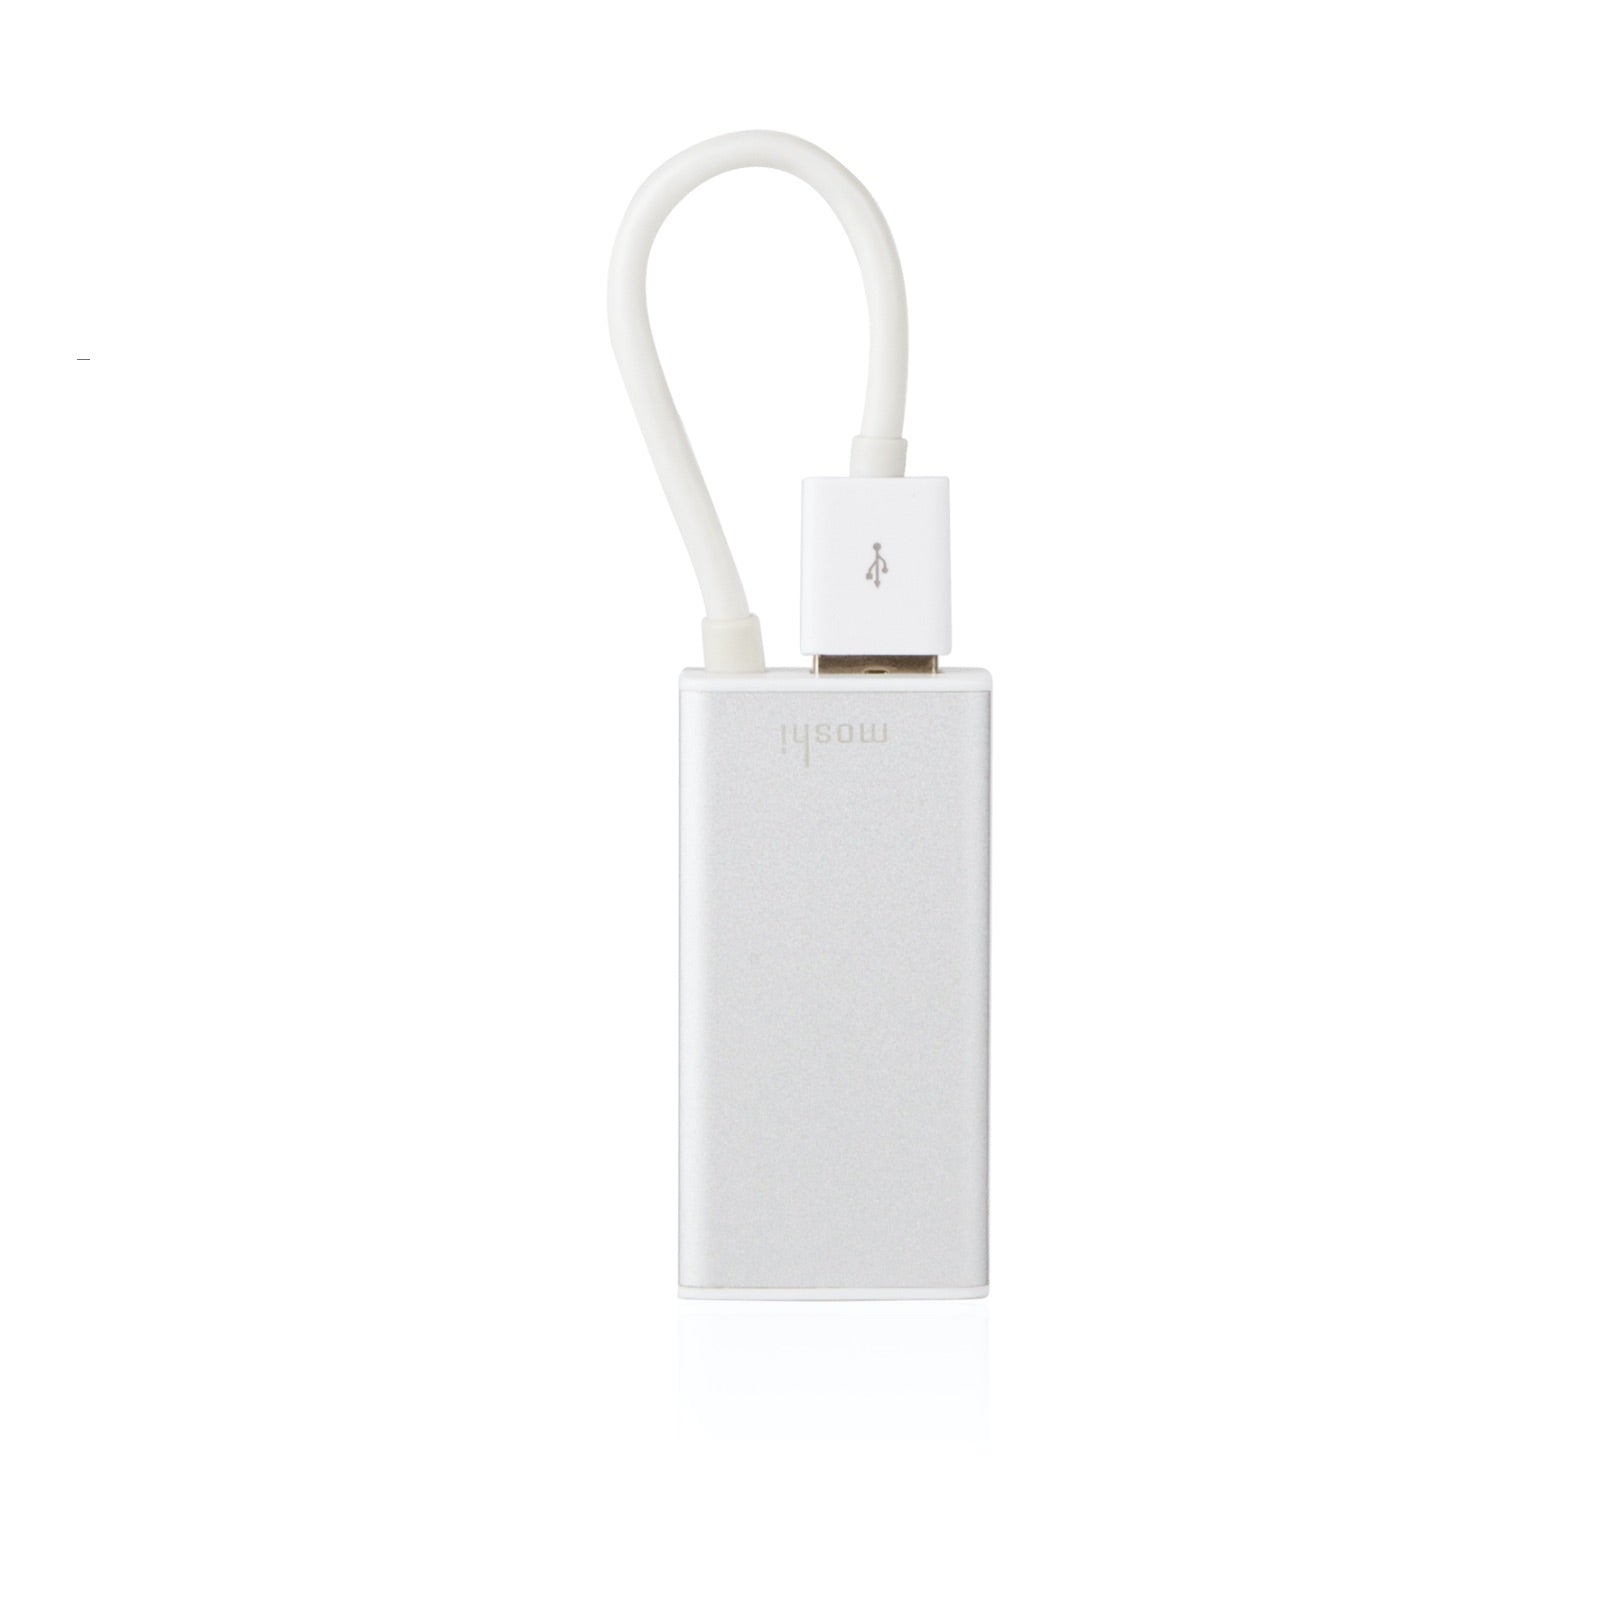 Moshi USB to Ethernet Adapter - Silver